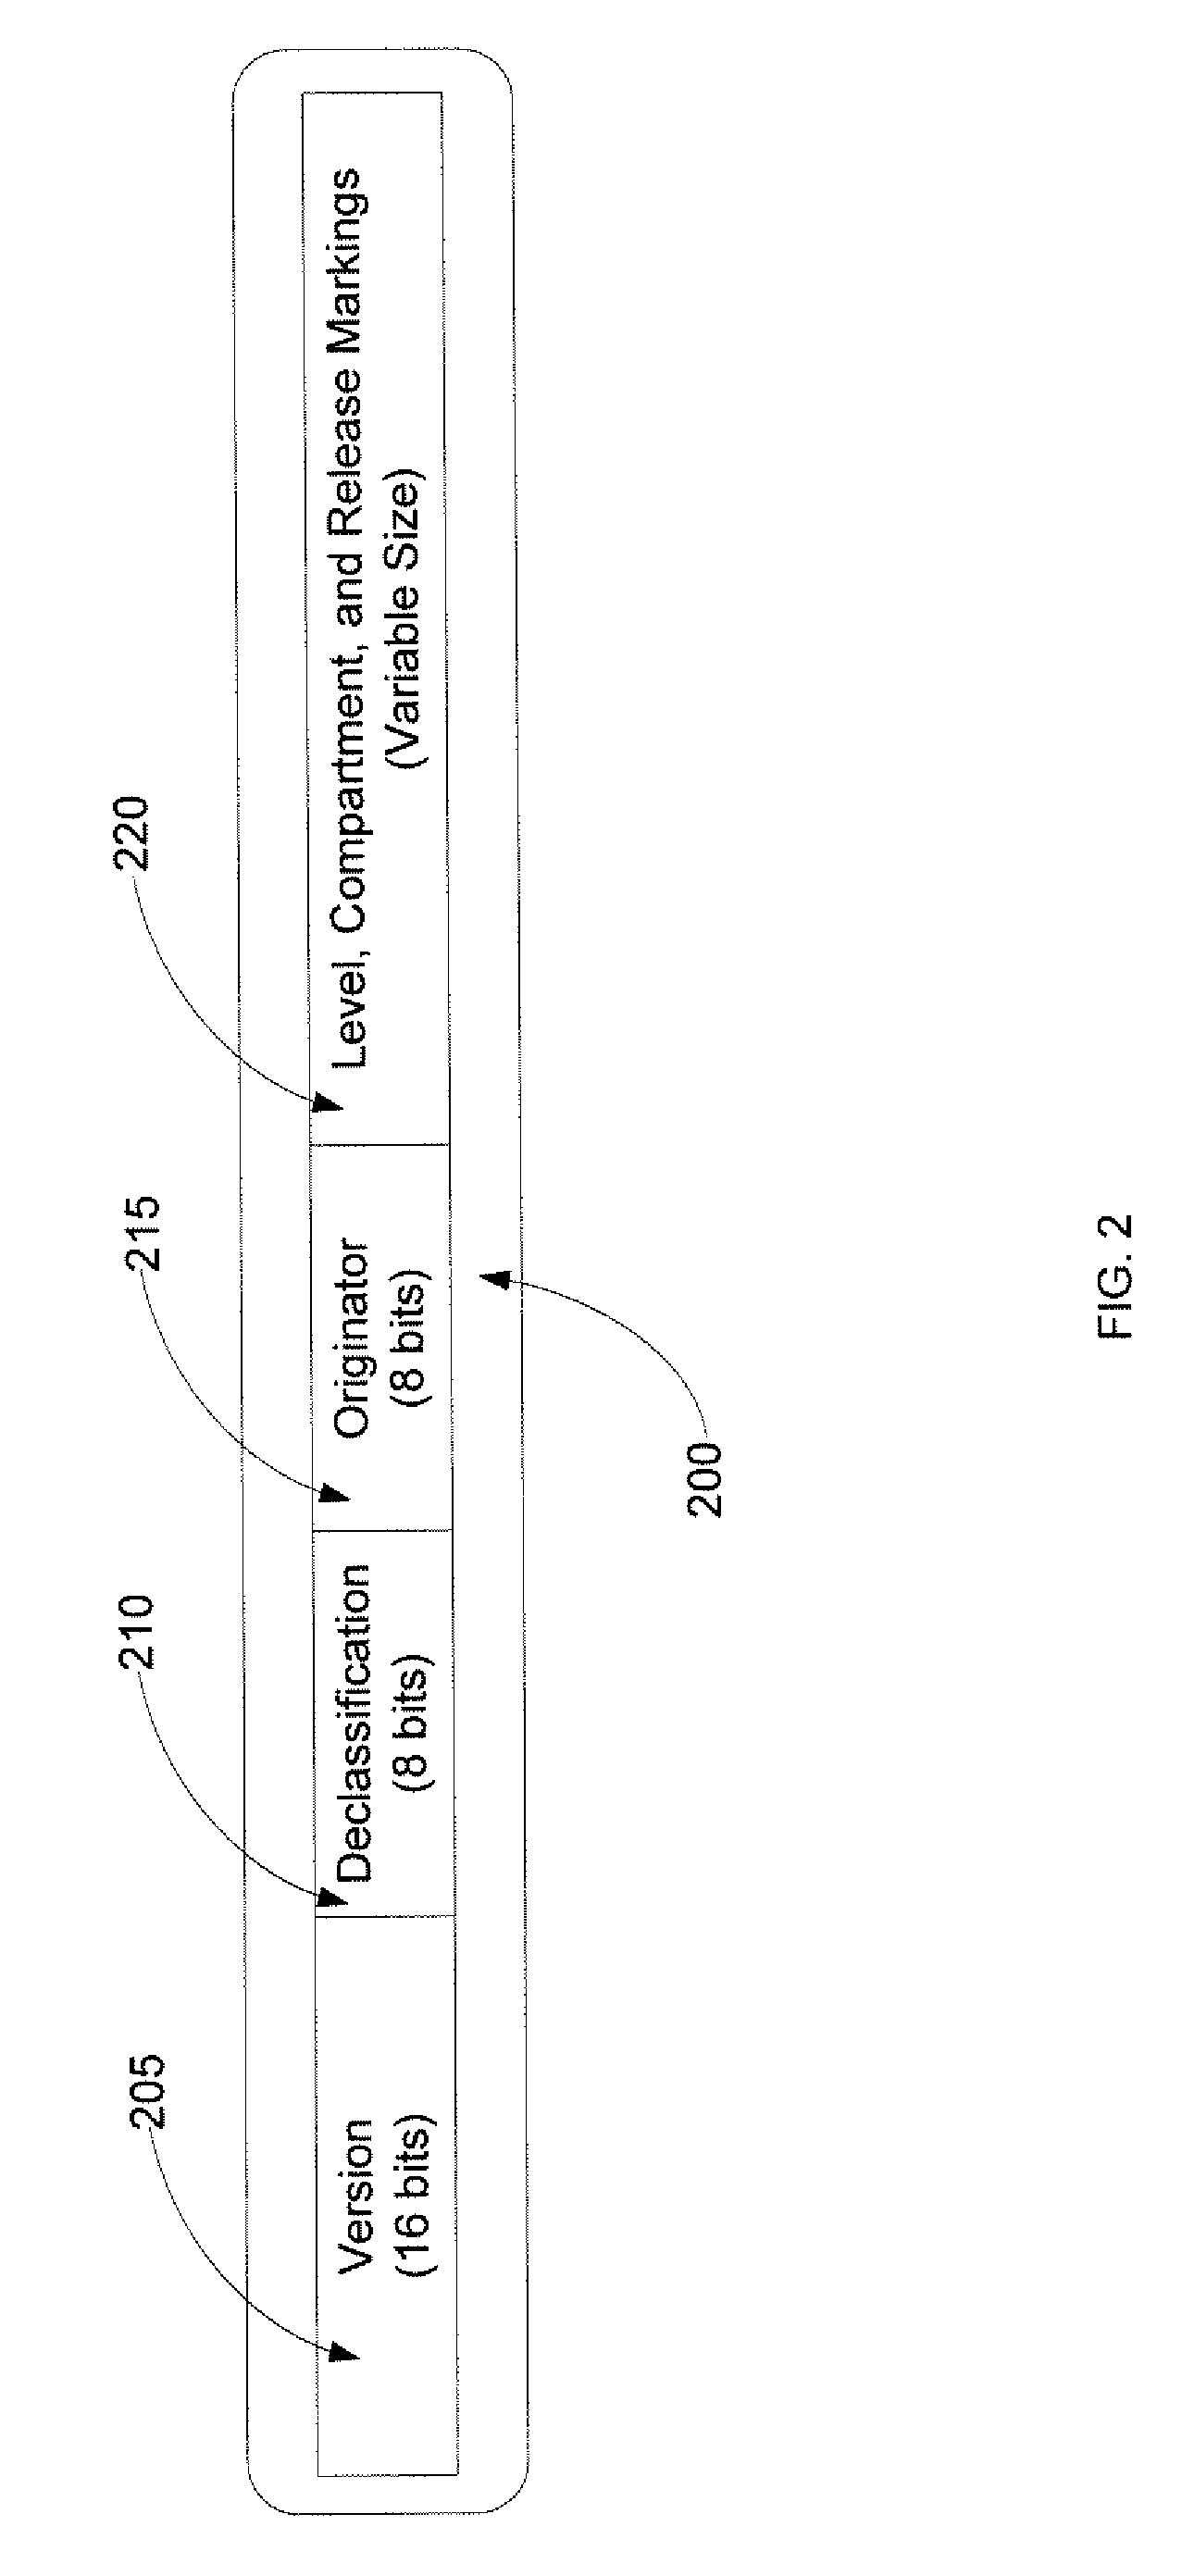 Systems and methods for the secure control of data within heterogeneous systems and networks